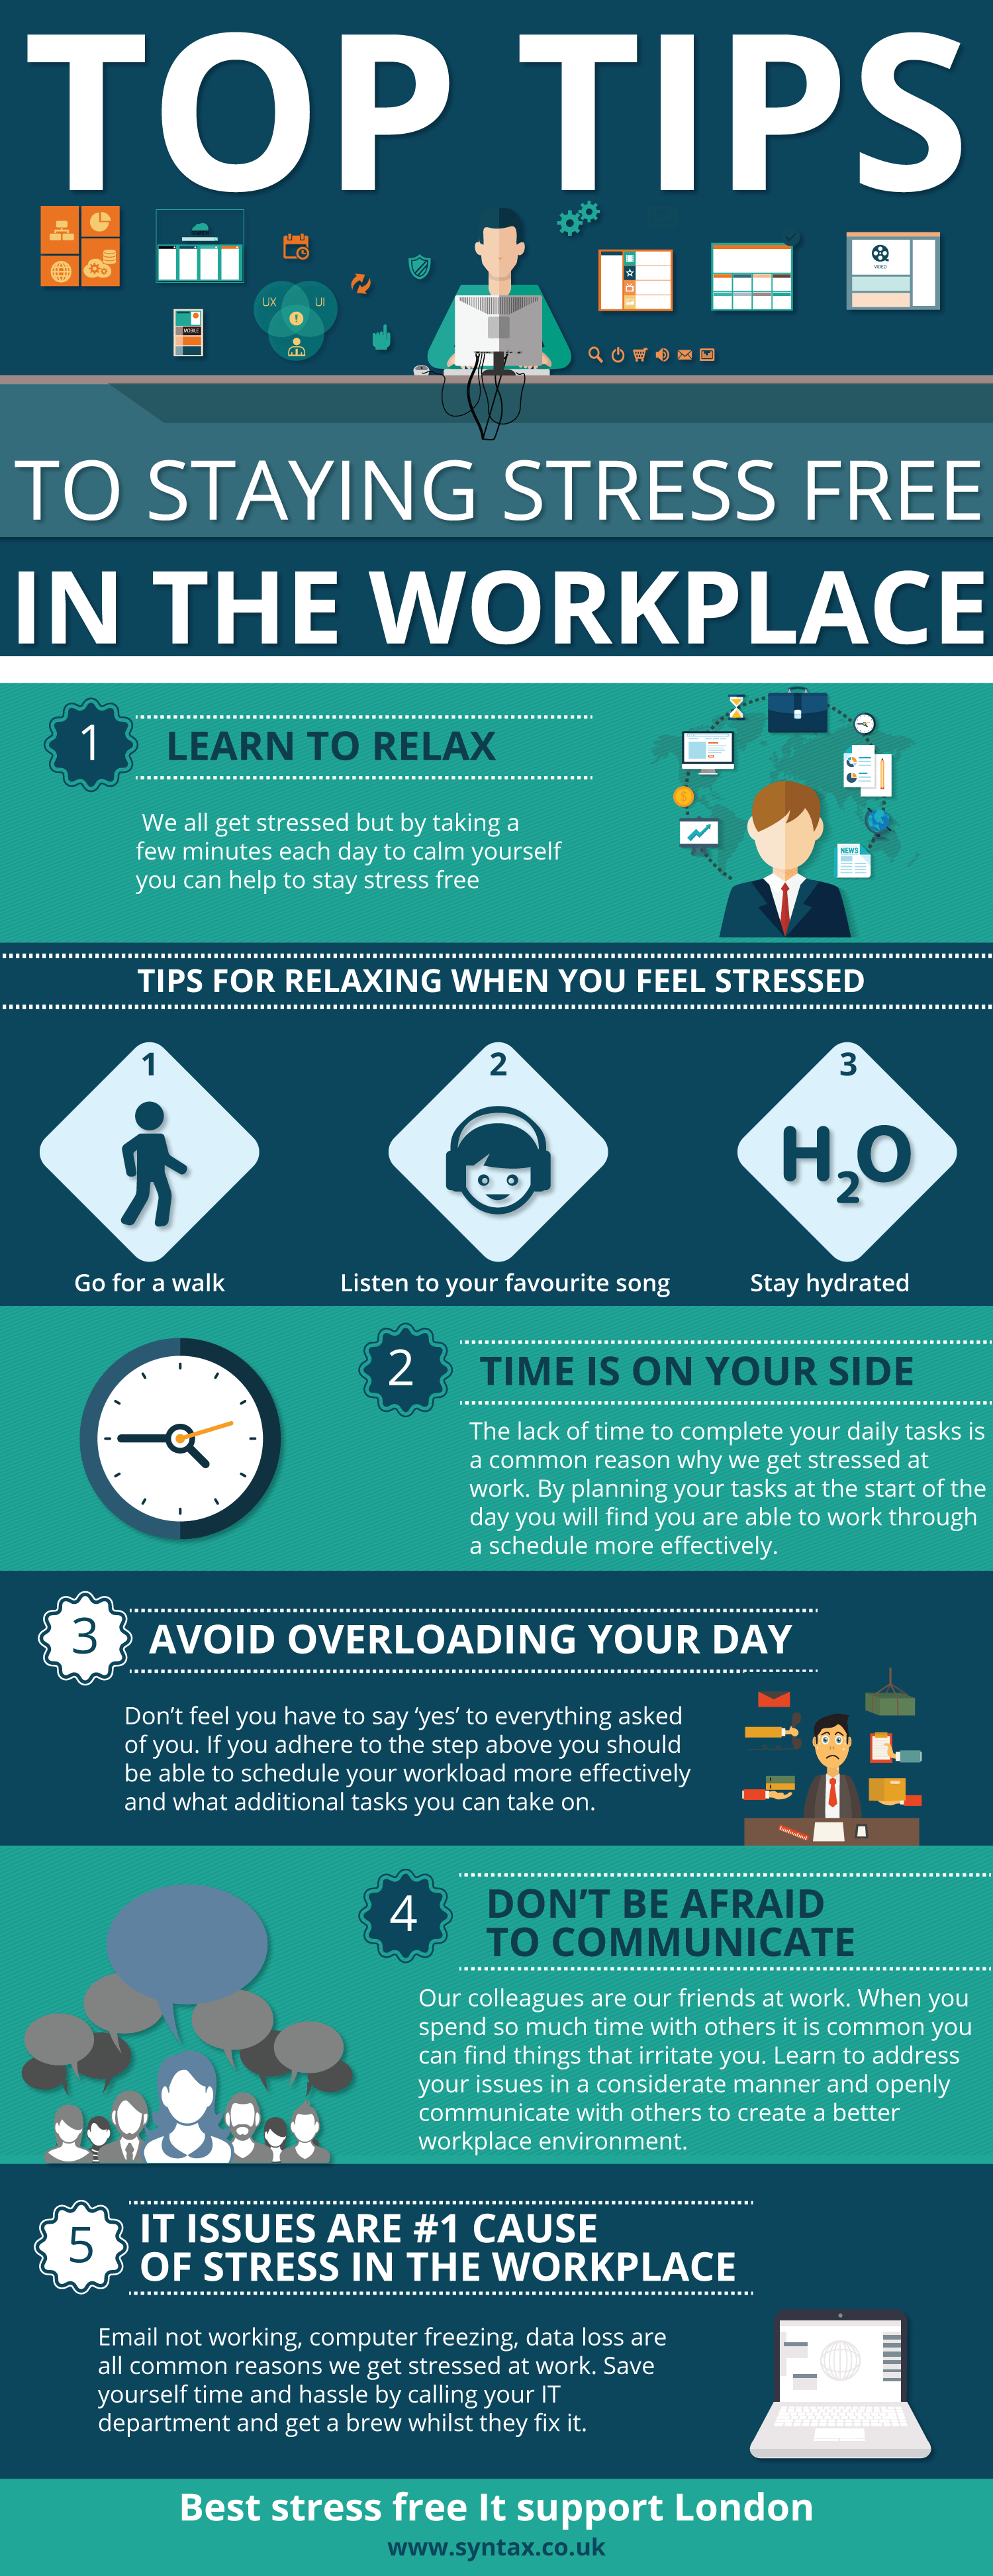 Top Tips To Staying Stress Free In The Workplace